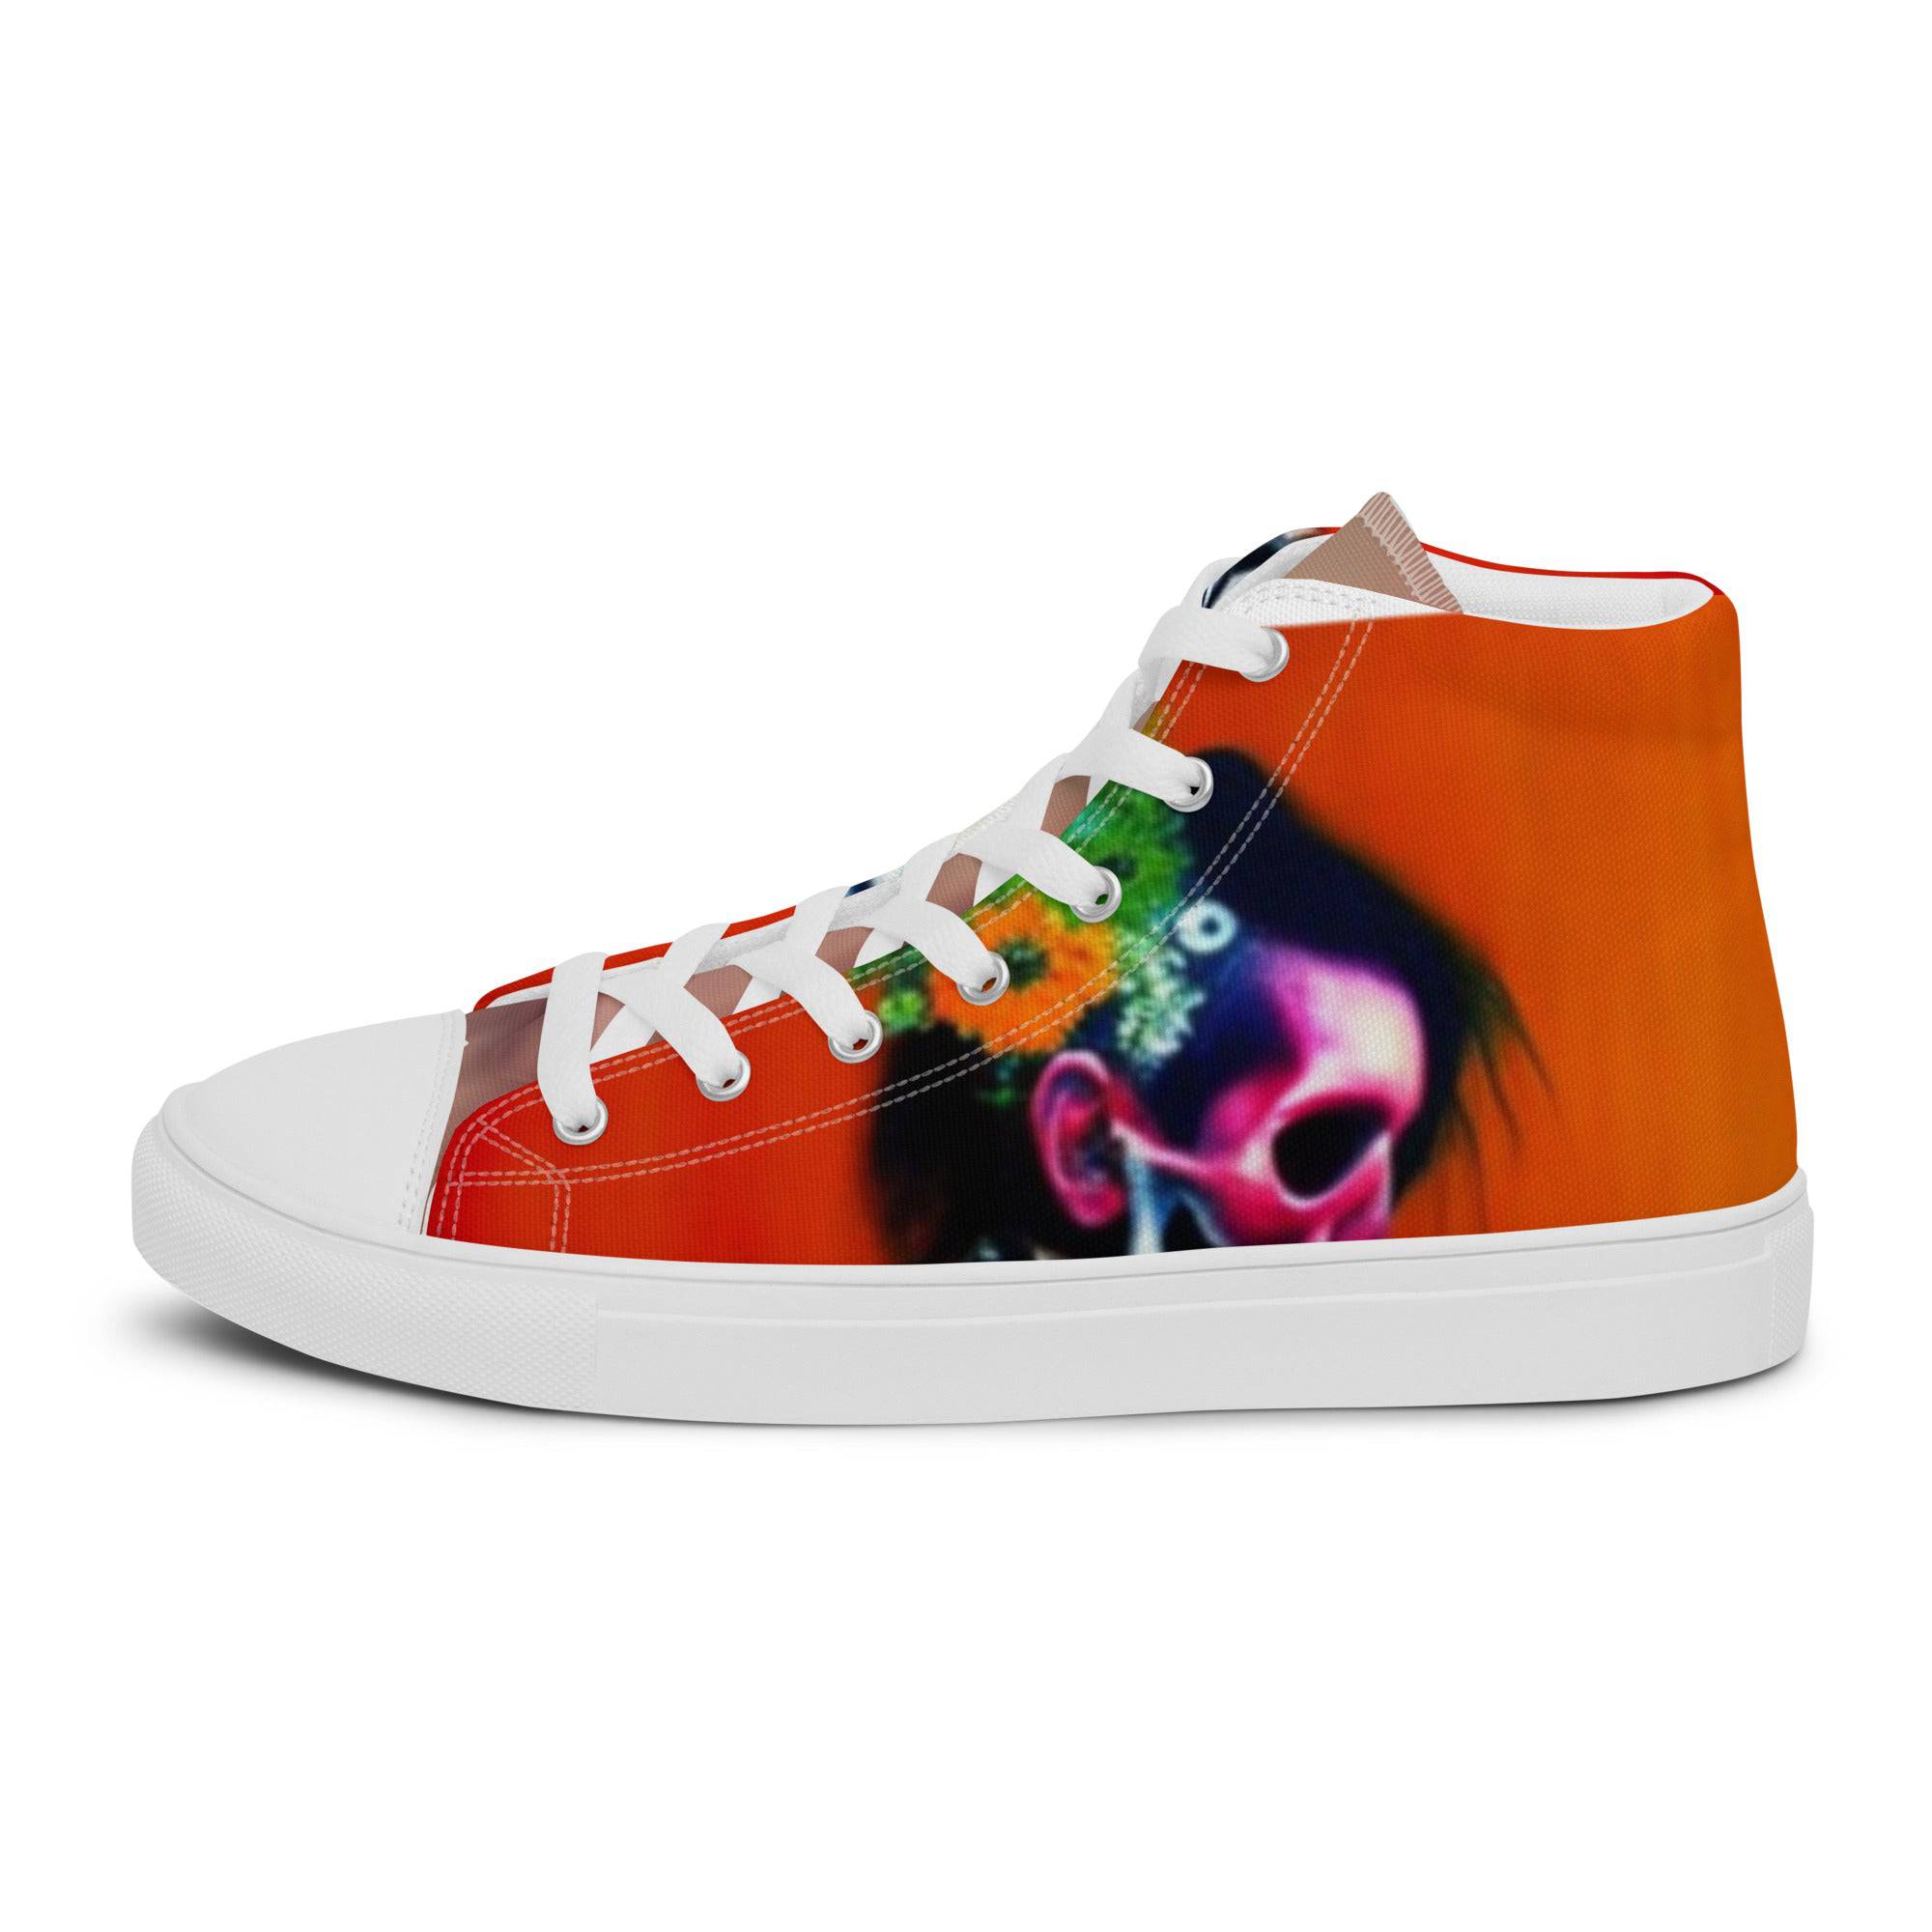 Enchanted Forest Women's High Top Canvas Shoes - Dance with Joy and Magic through Enchanting Lands. - Guy Christopher